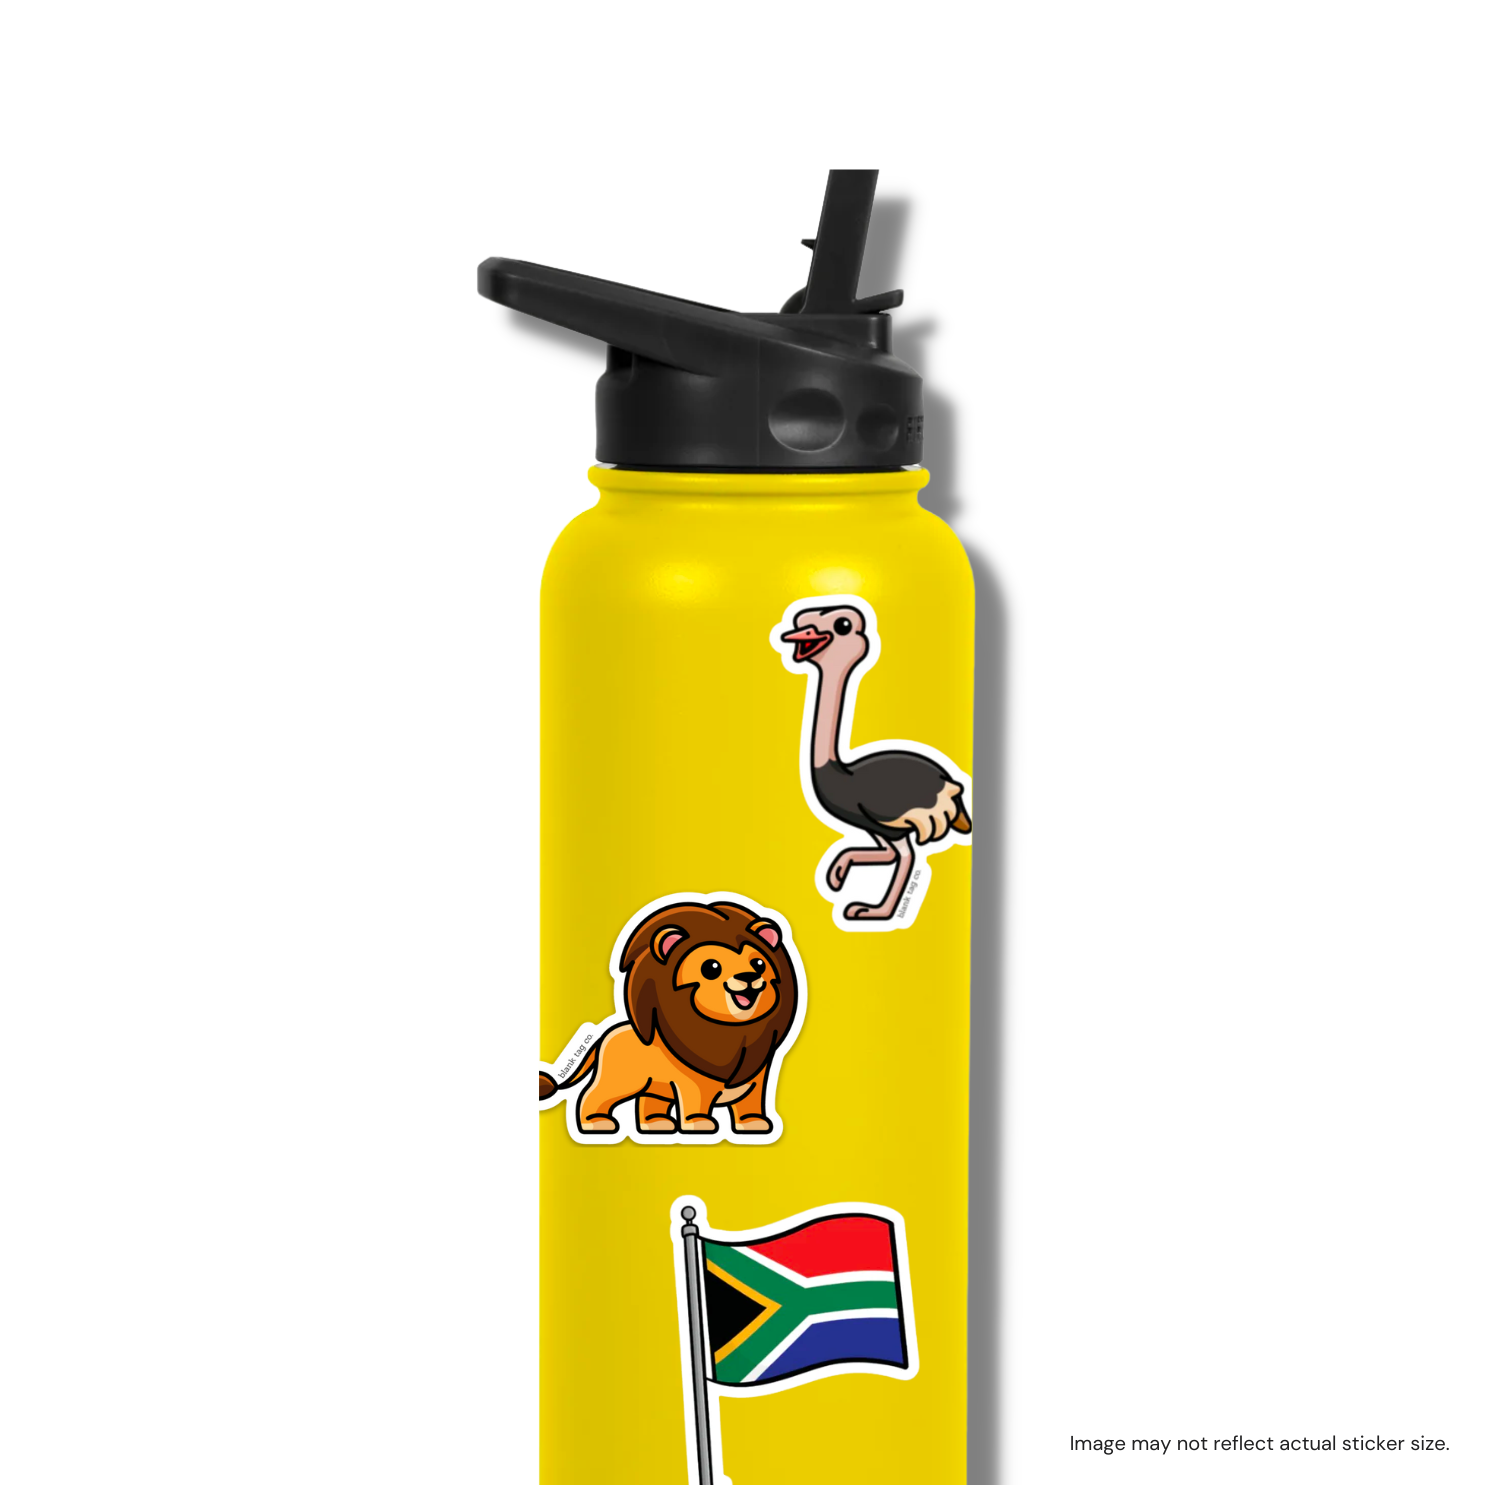 The South Africa Flag Sticker